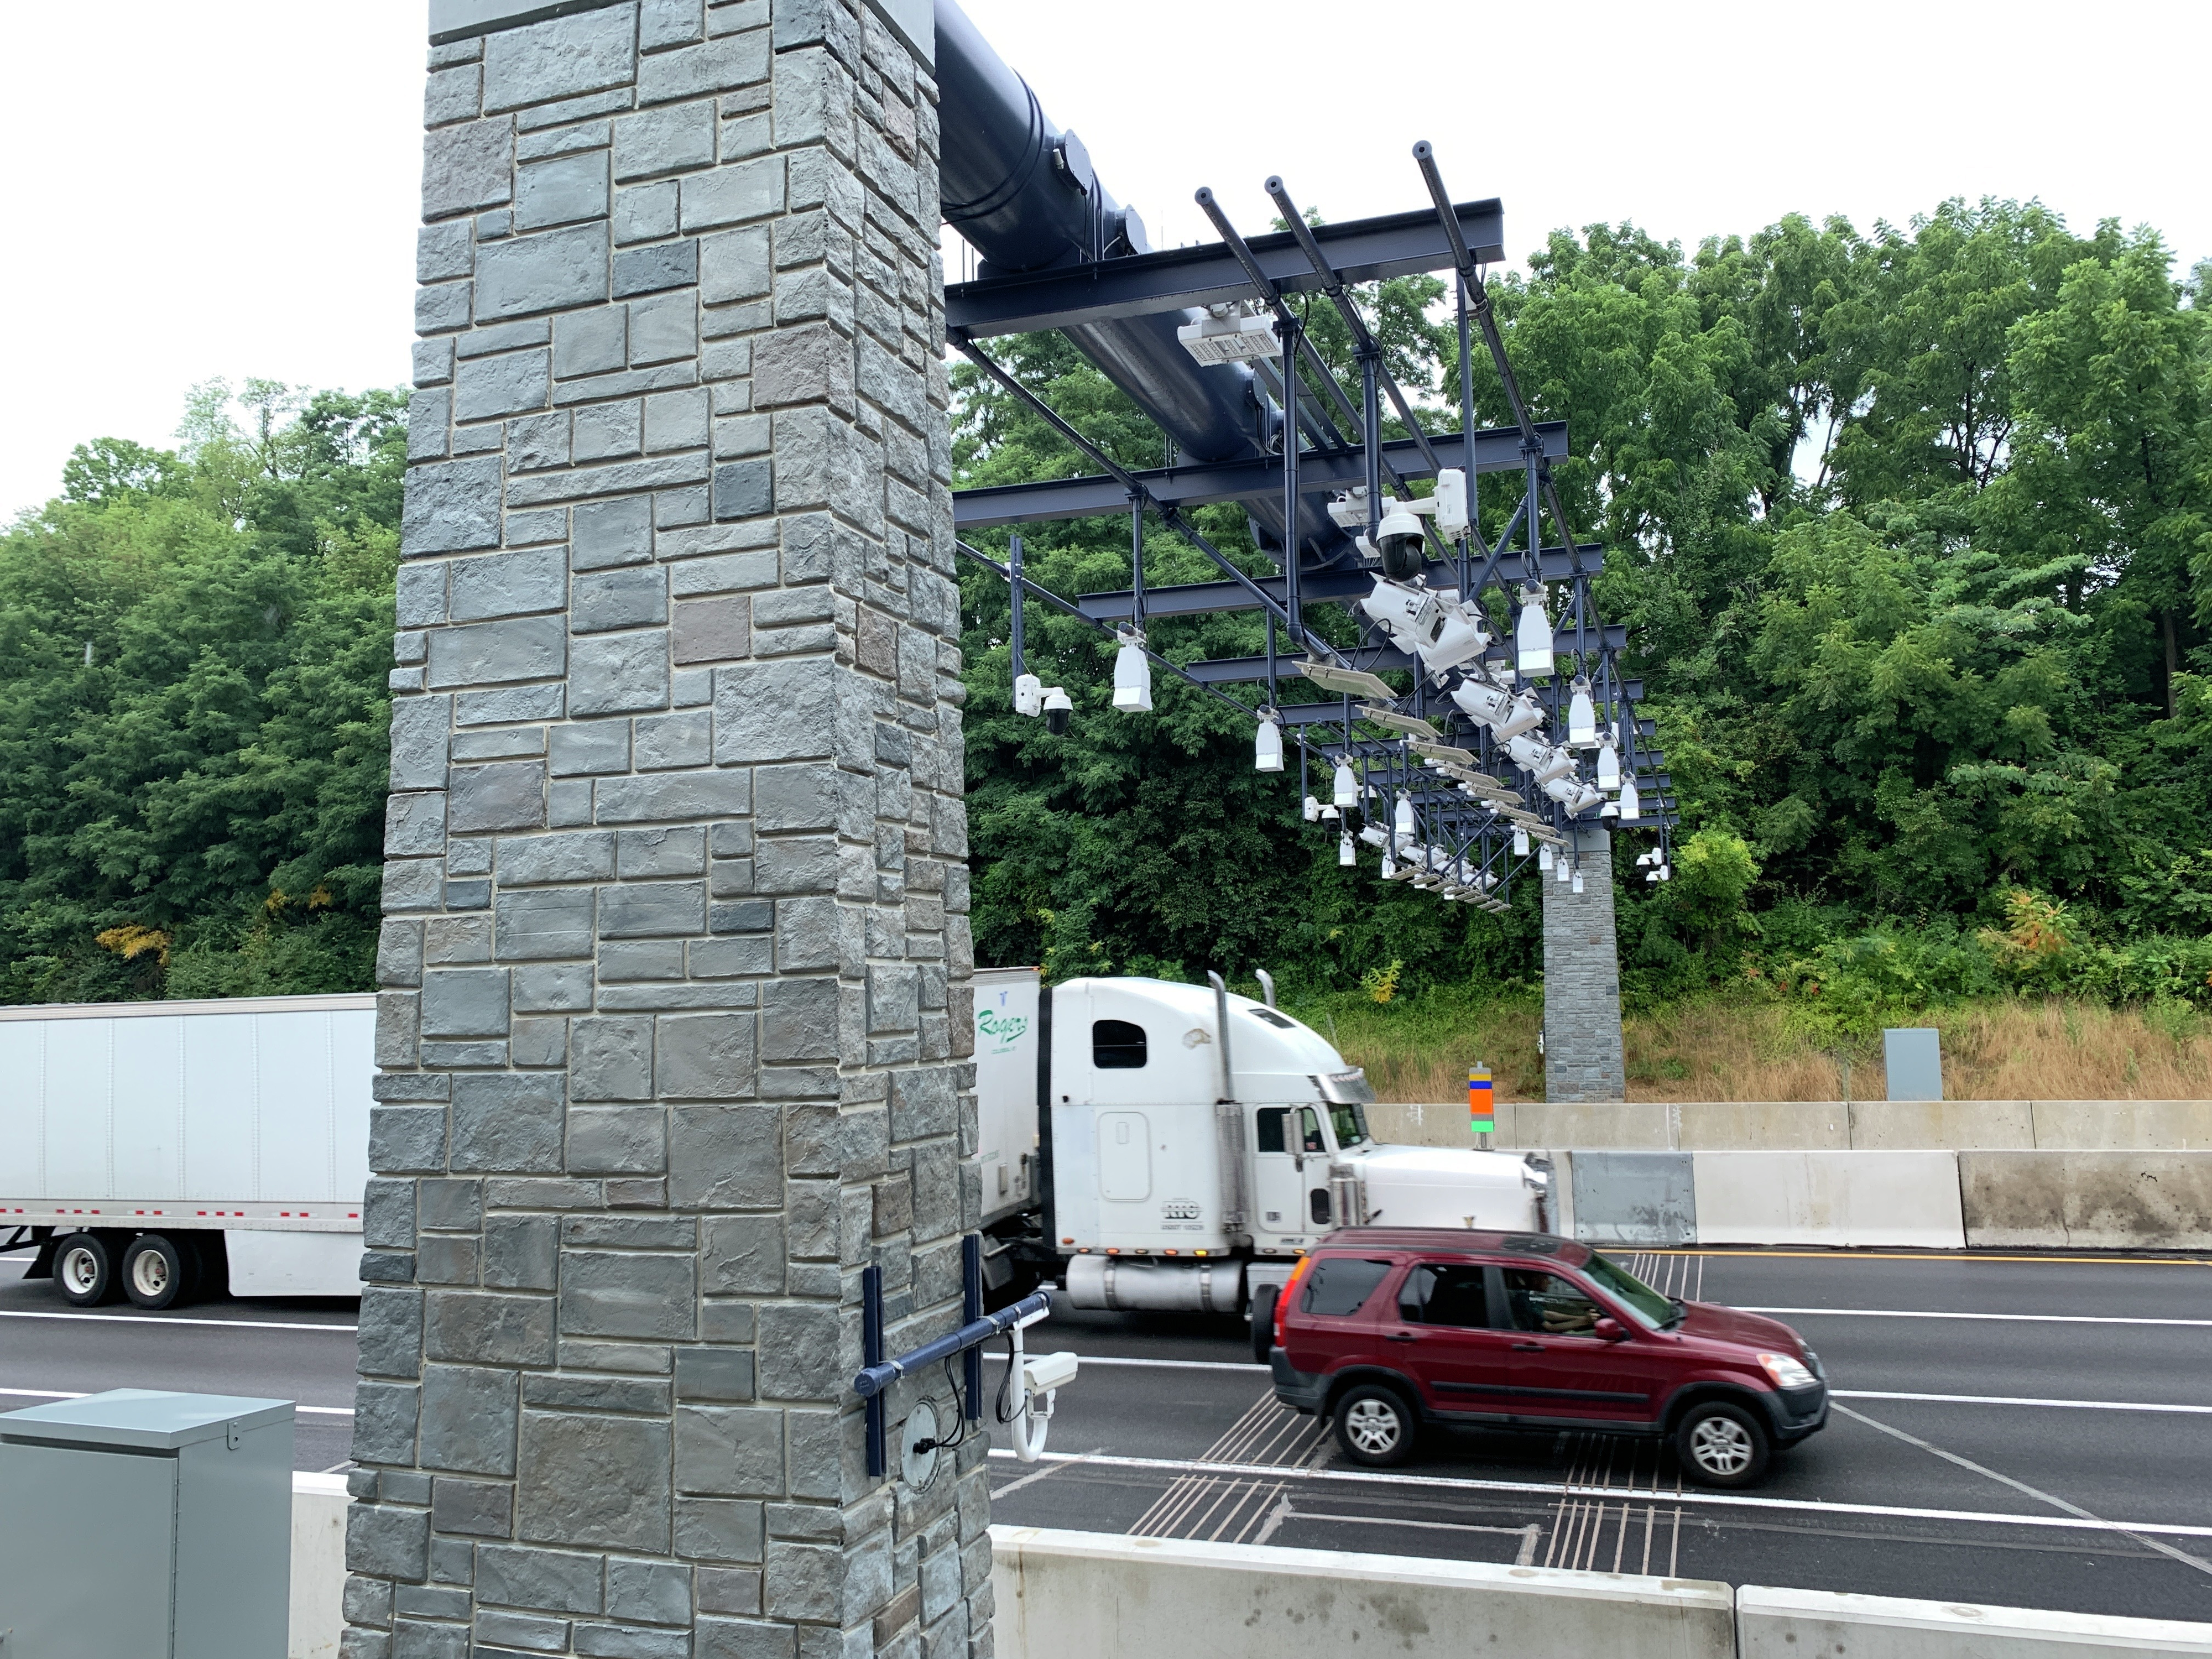 Pennsylvania Turnpike to switch to ‘open road’ toll system east of Reading in January